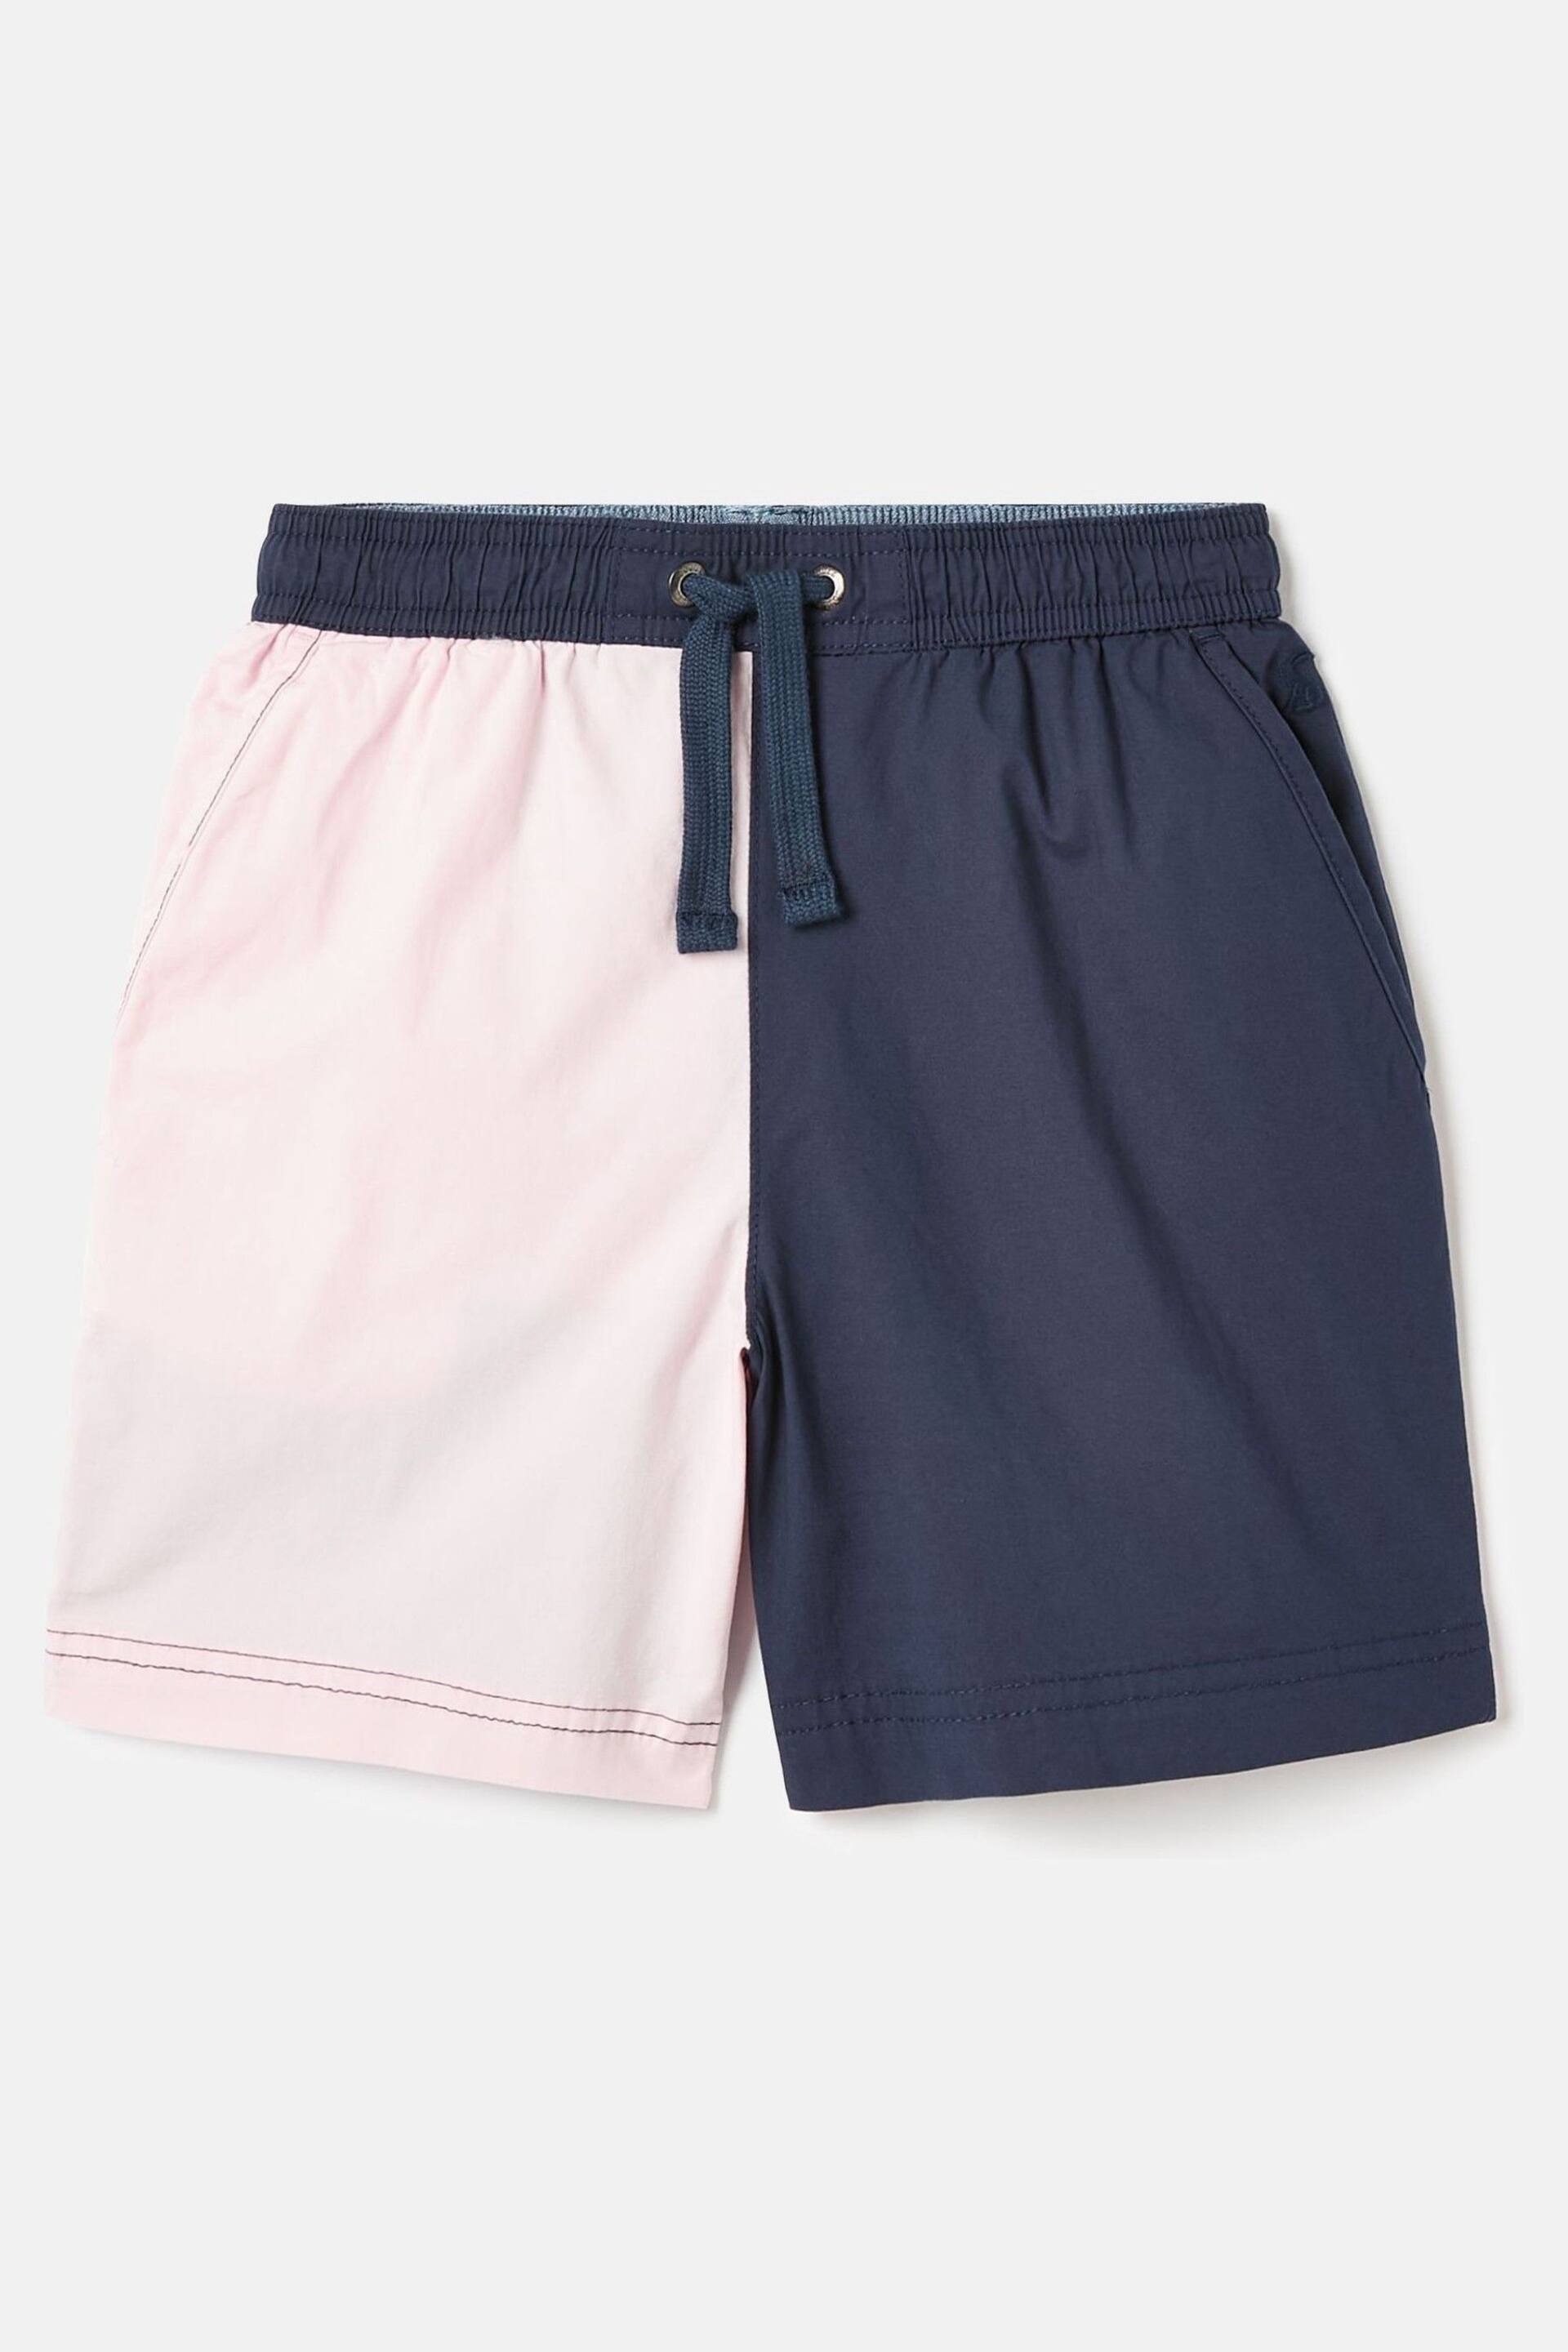 Joules Quayside Navy & Pink Elastic Waist Chino Shorts - Image 1 of 5